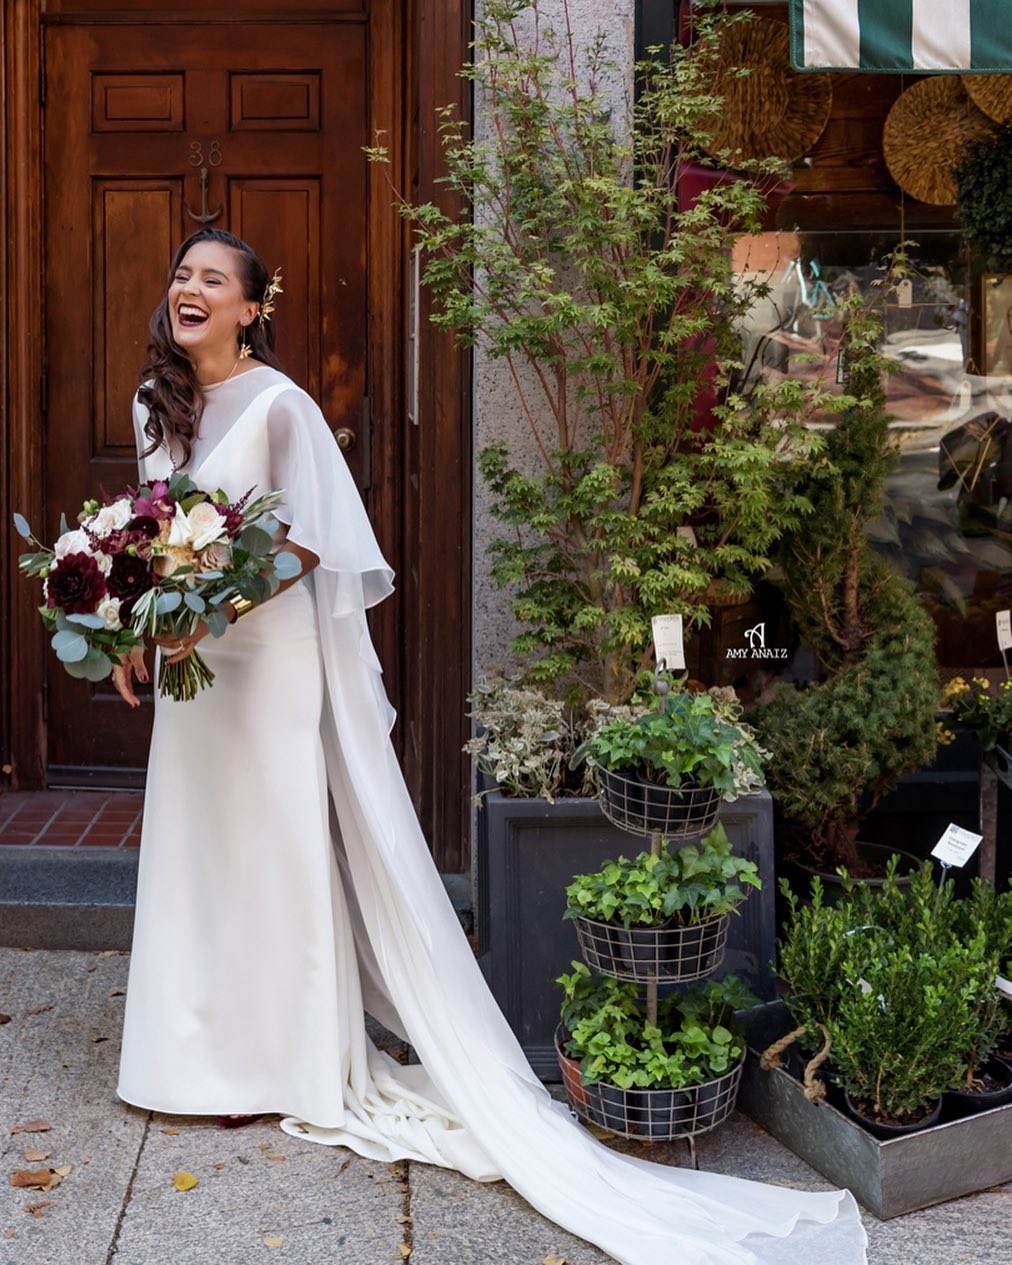 Serving up some Sunday goodness 

@stephp_l in her @sarahseven gown and @hanafloral bouquet ?